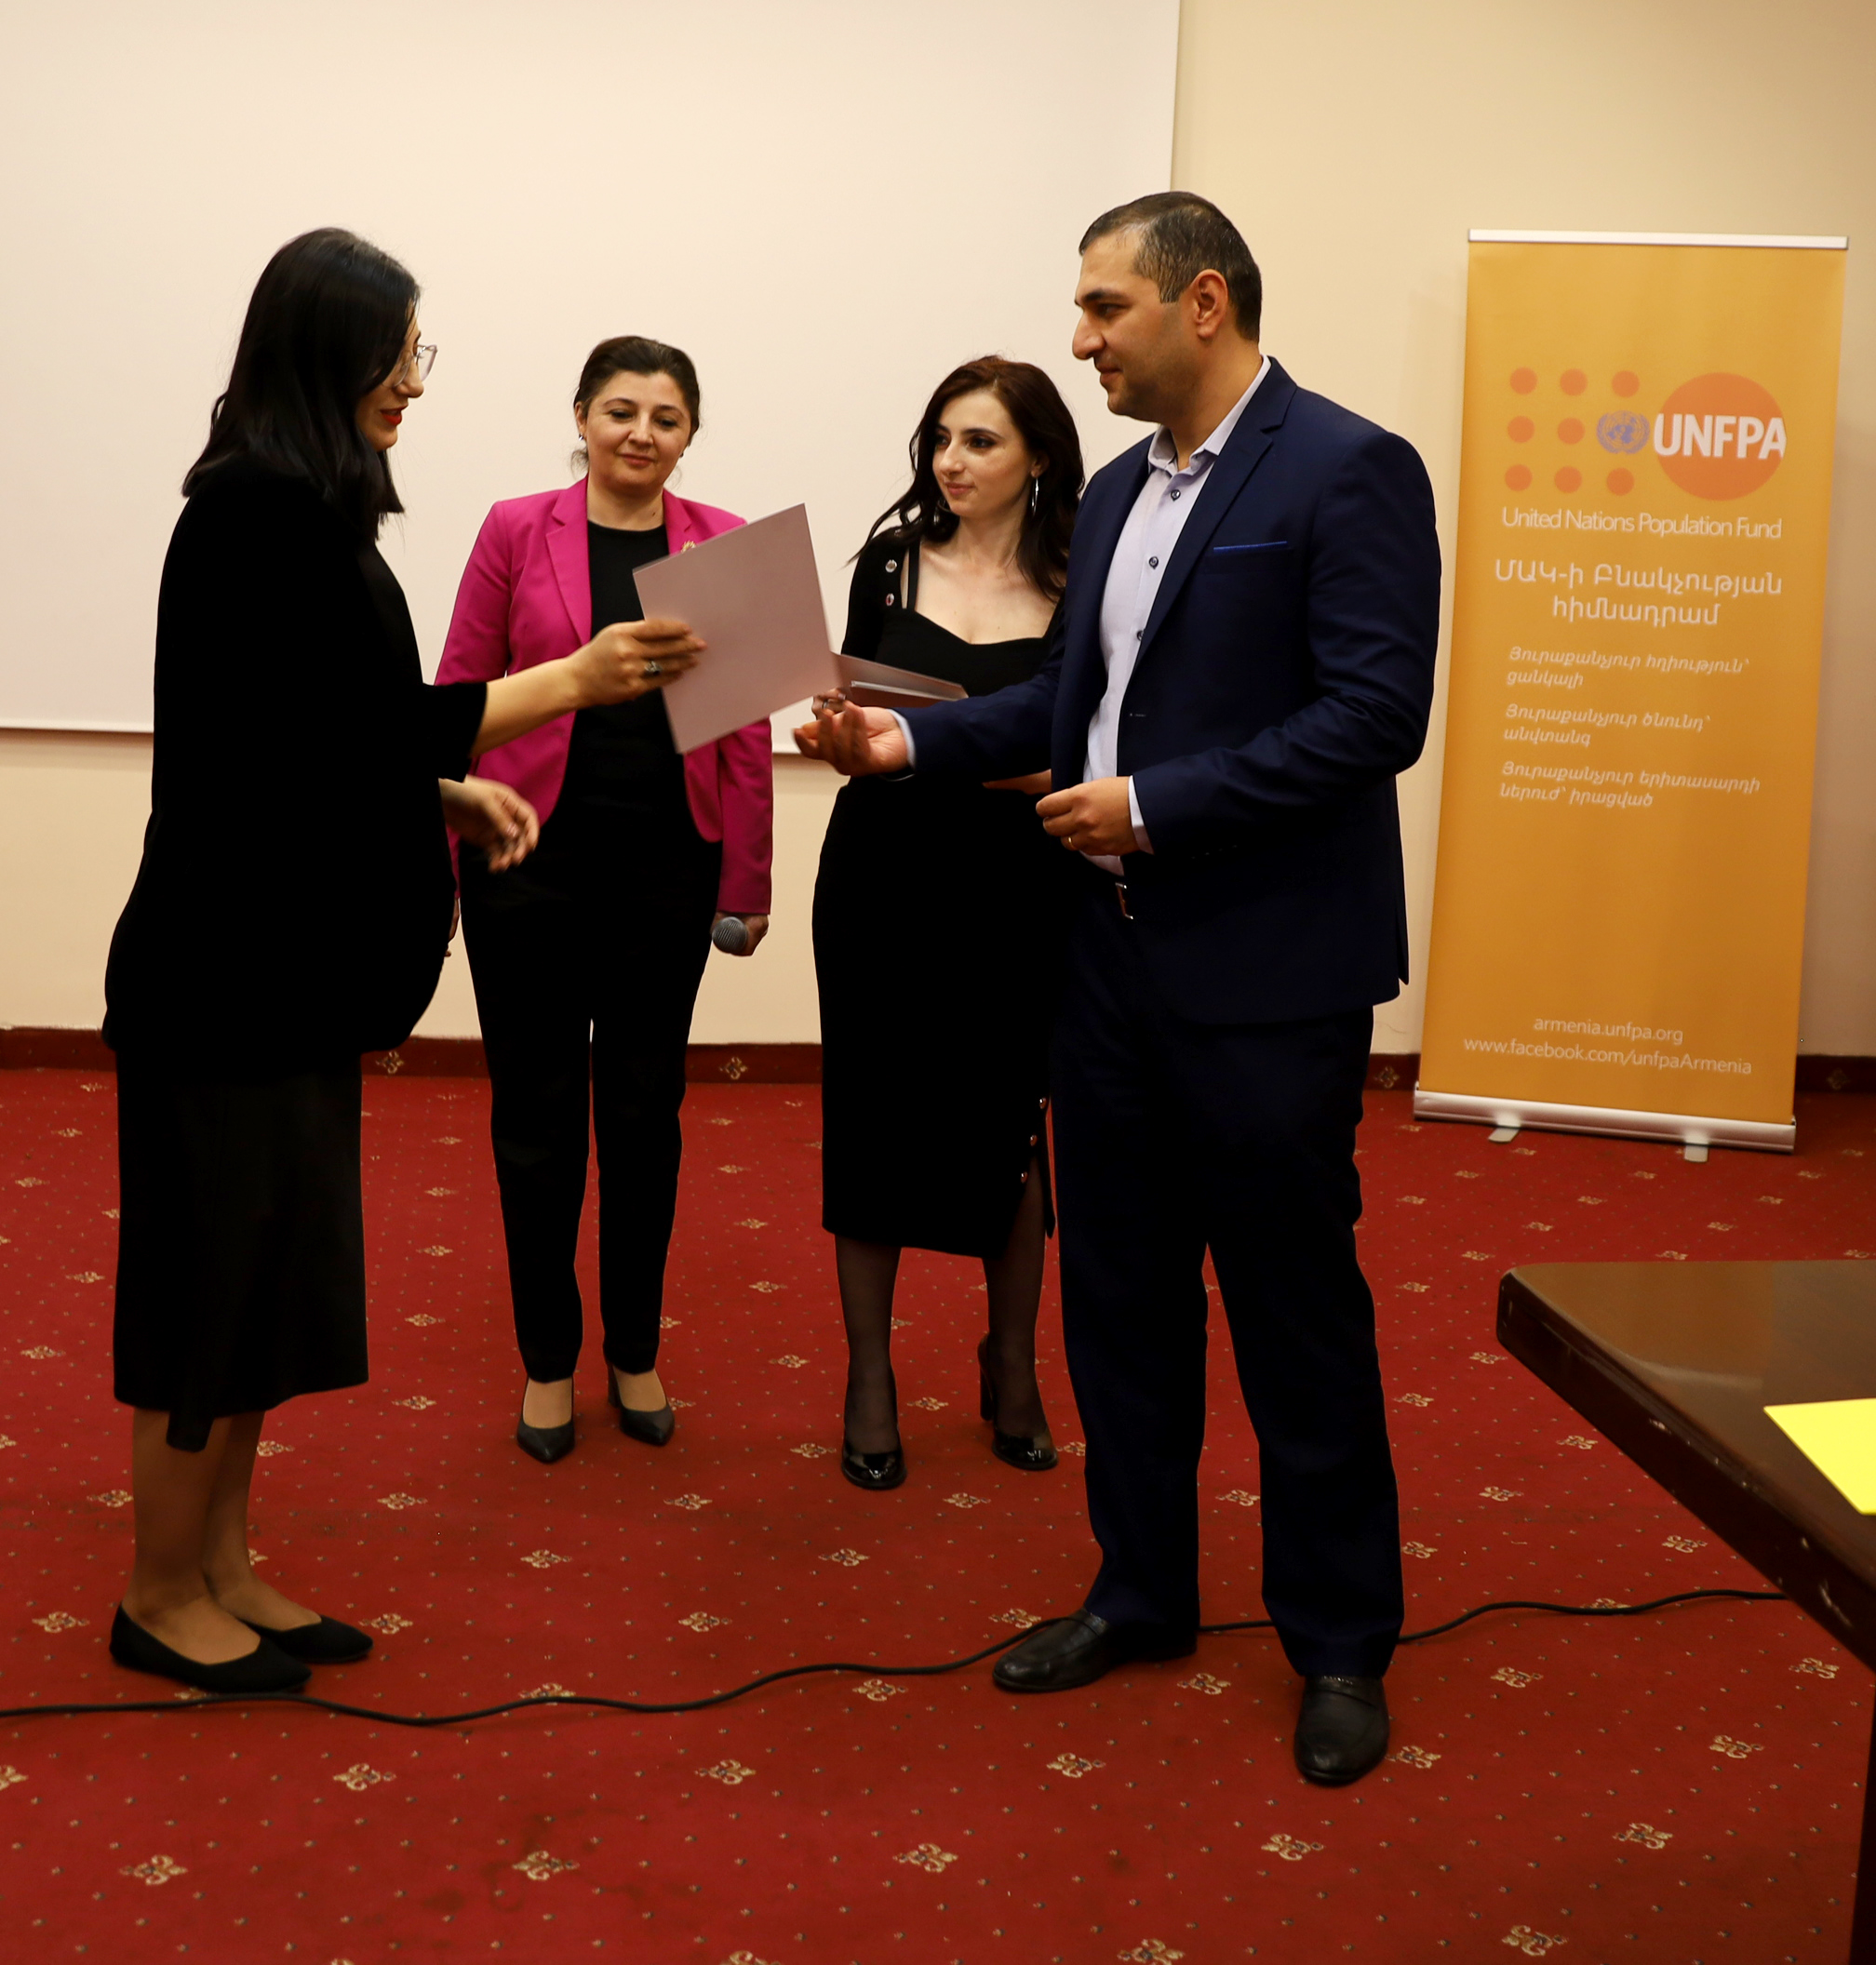 The workshop participants are receiving certificates  from the UNFPA and Ministry of Health 